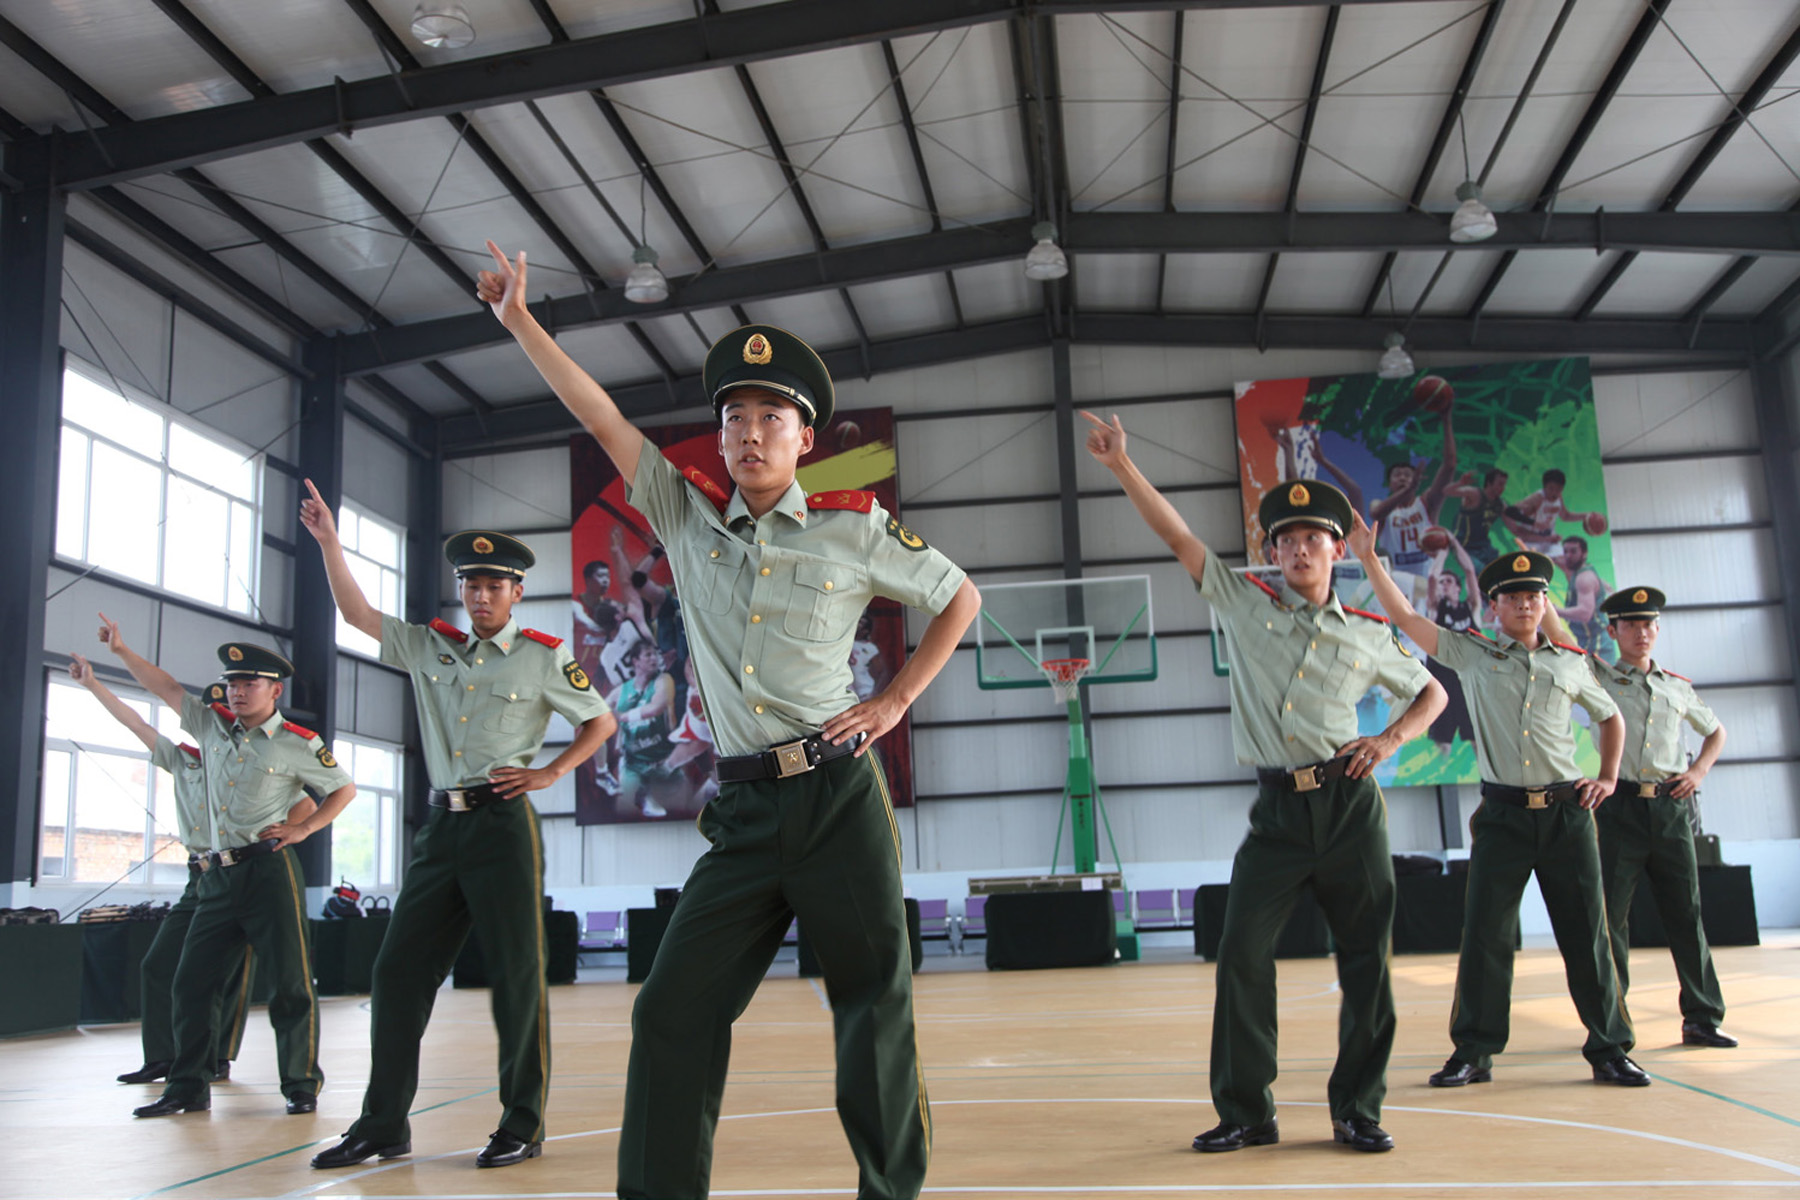 JILIN, CHINA - JULY 30: (CHINA OUT) Police officers dance along with the ''Little Apple'' song (by Chopsticks Brothers) to release pressure on July 30, 2014 in Jilin province of China. (Photo by ChinaFotoPress/ChinaFotoPress via Getty Images)